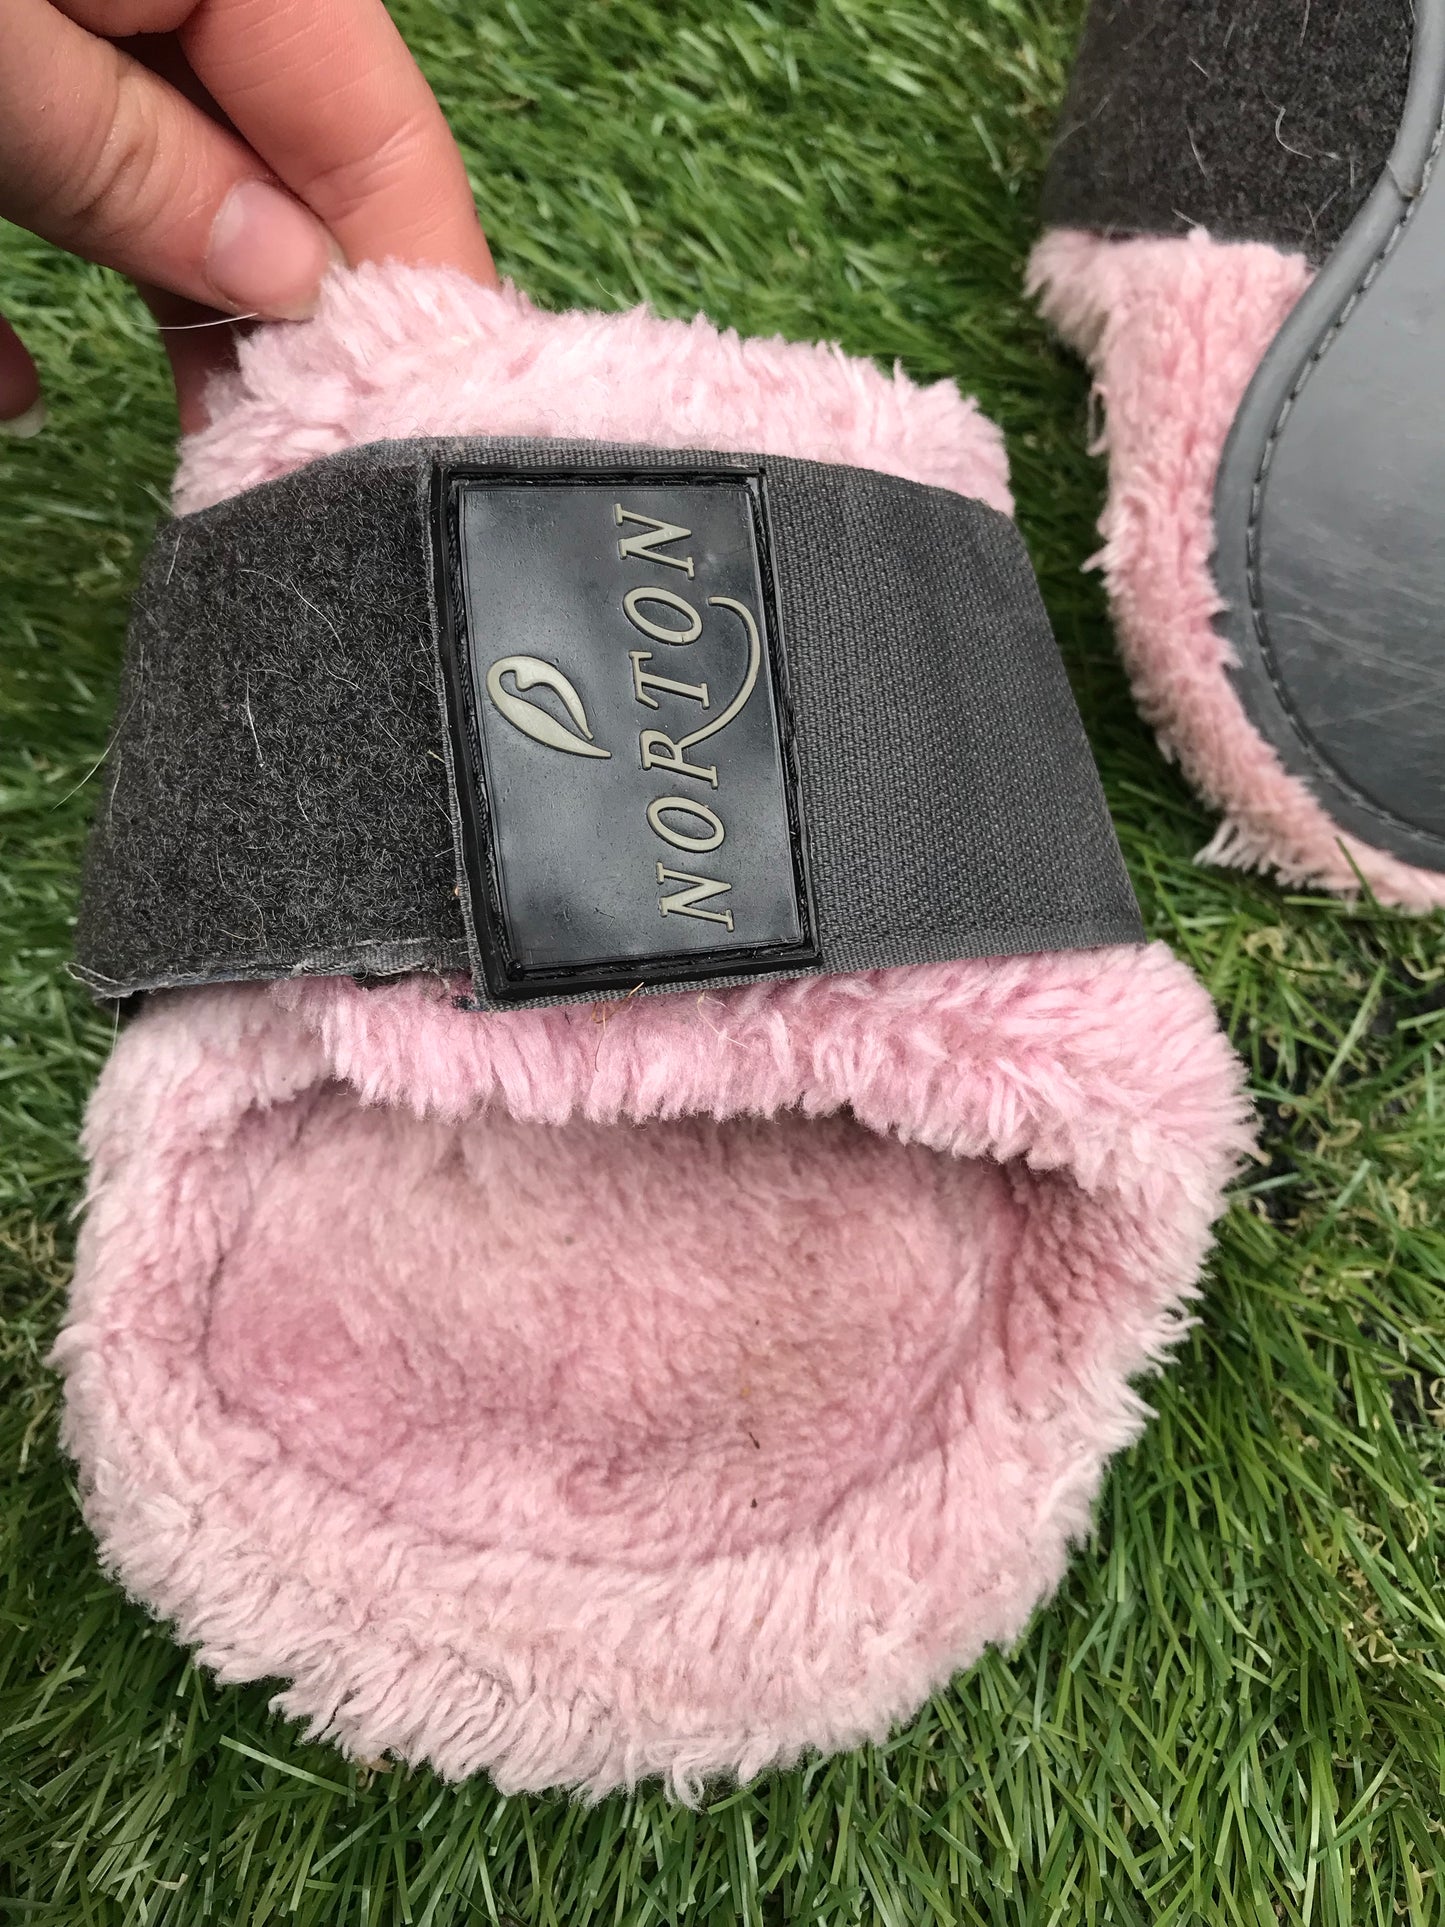 Norton cob size fetlock boots pink and grey comfort a FREE POSTAGE